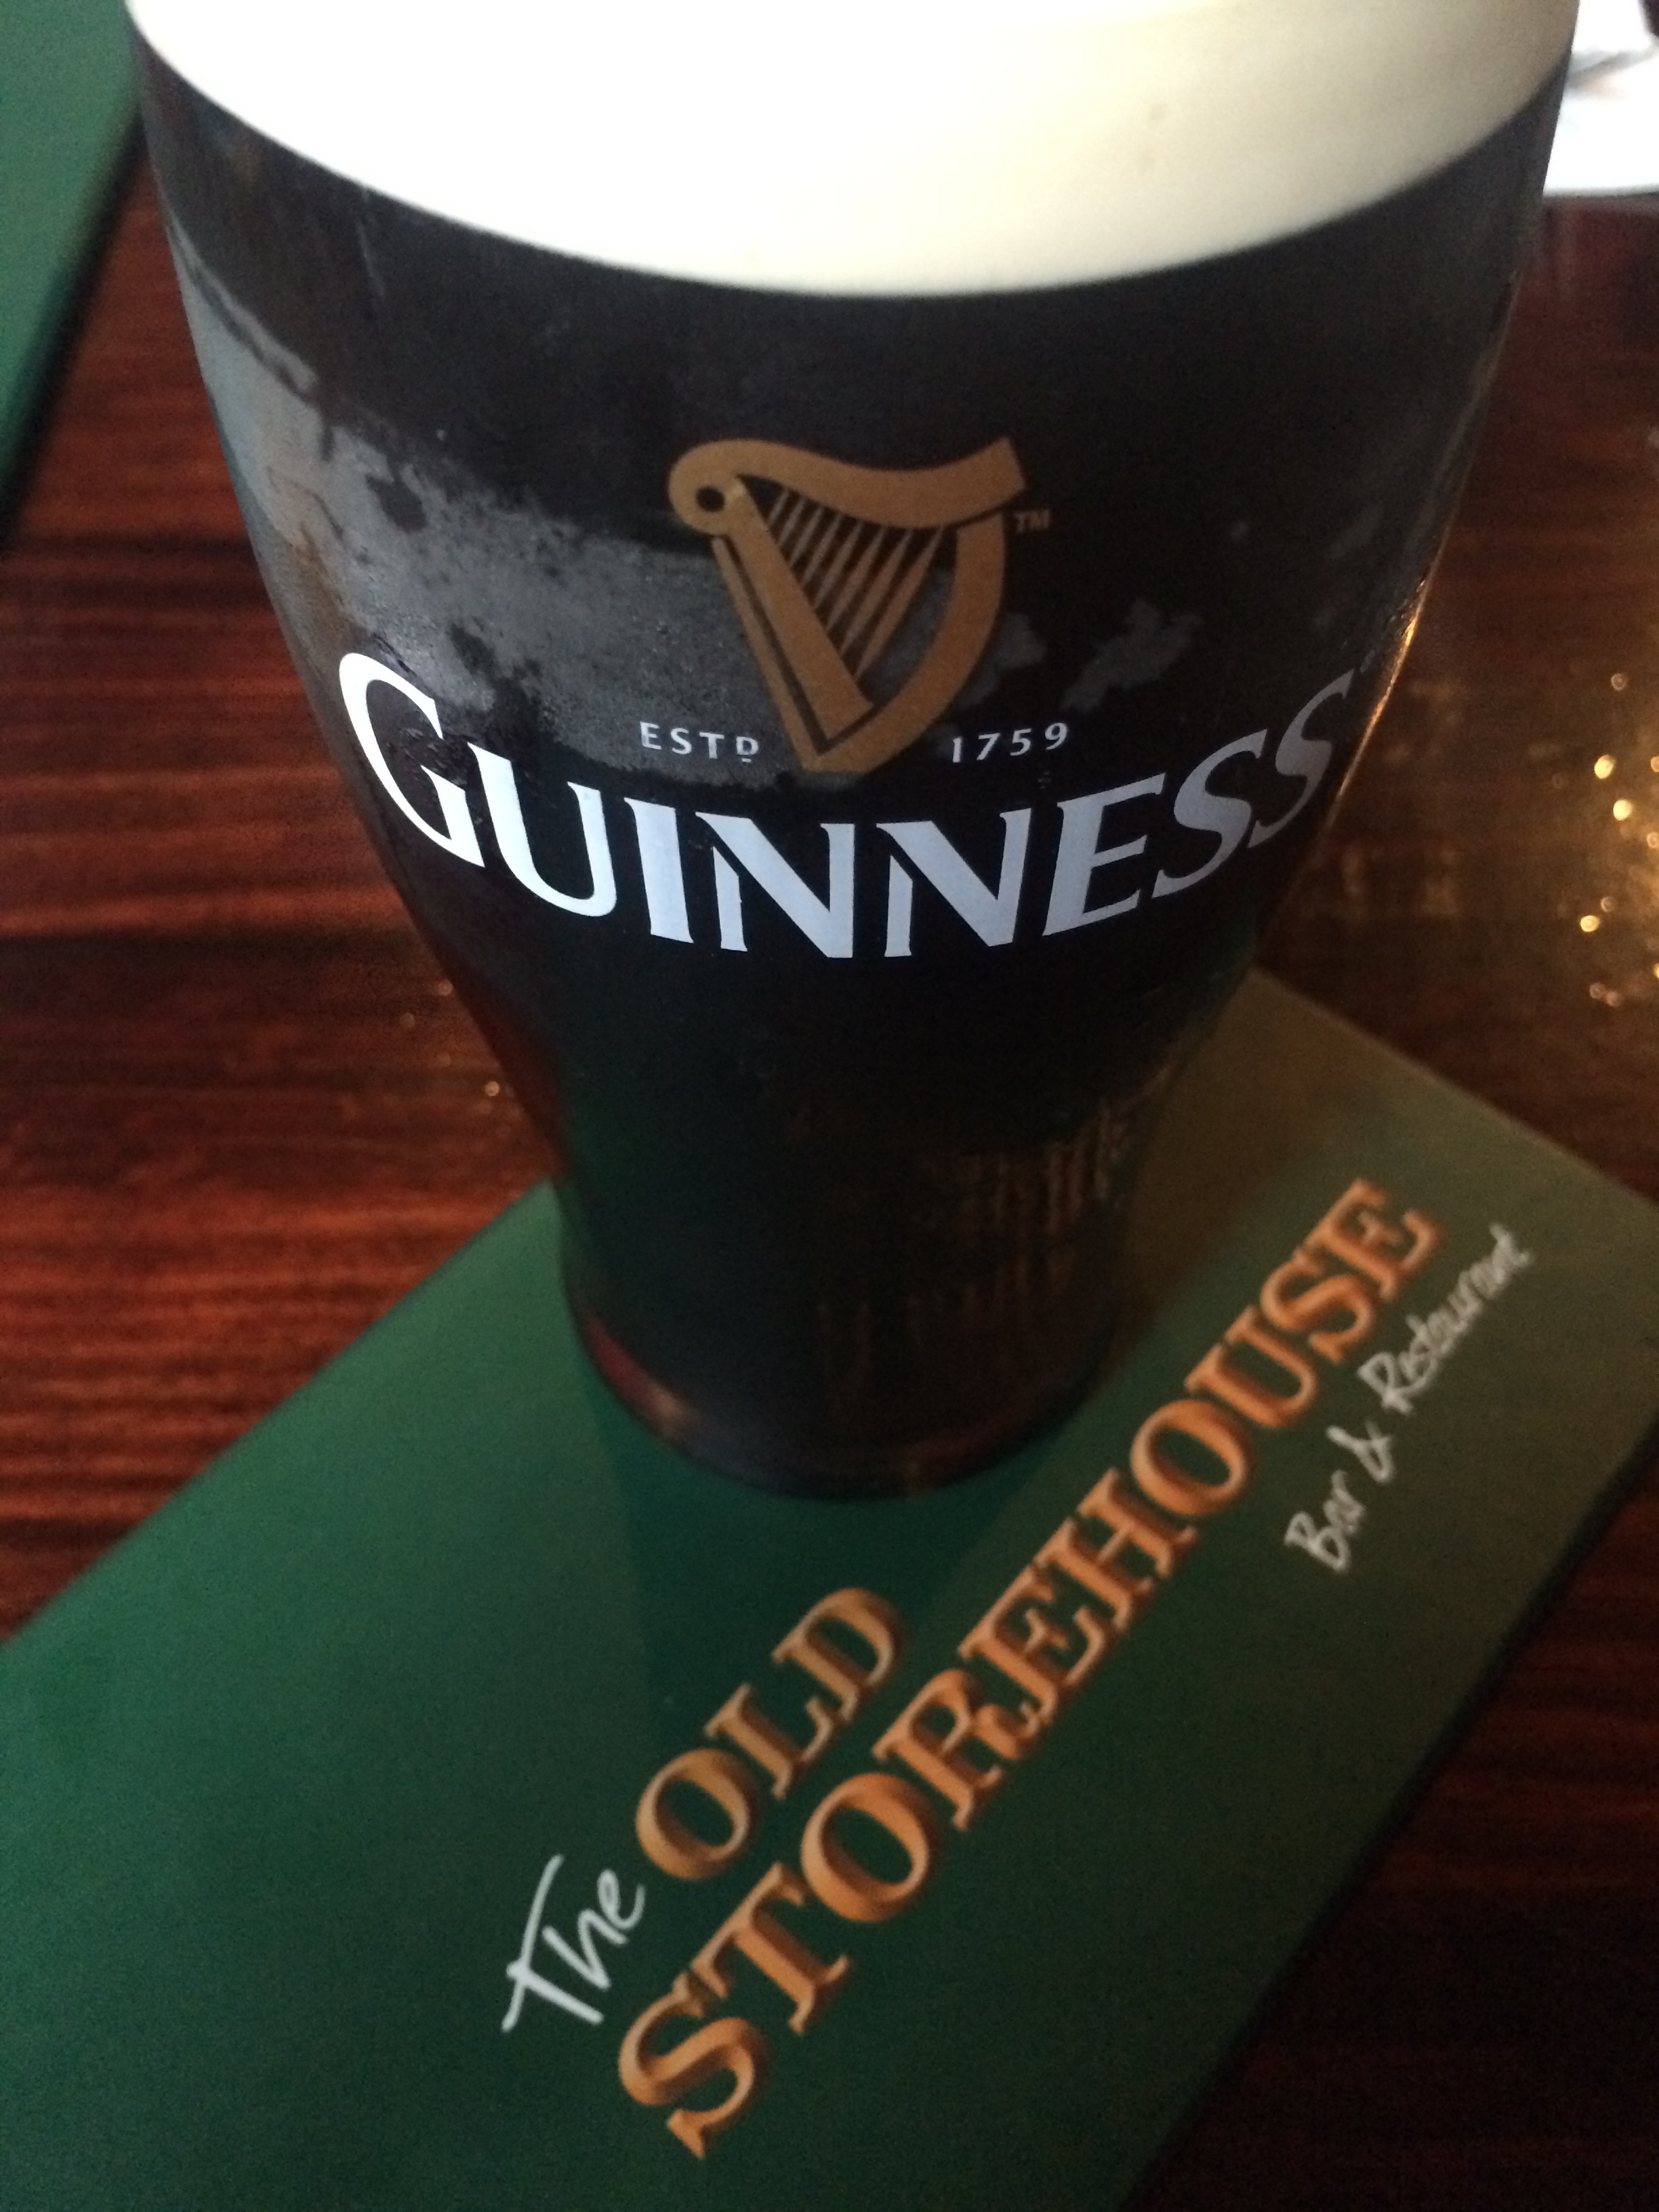 My first Guinness during my trip to Dublin took place at The Old Storehouse in Dublin, Ireland.